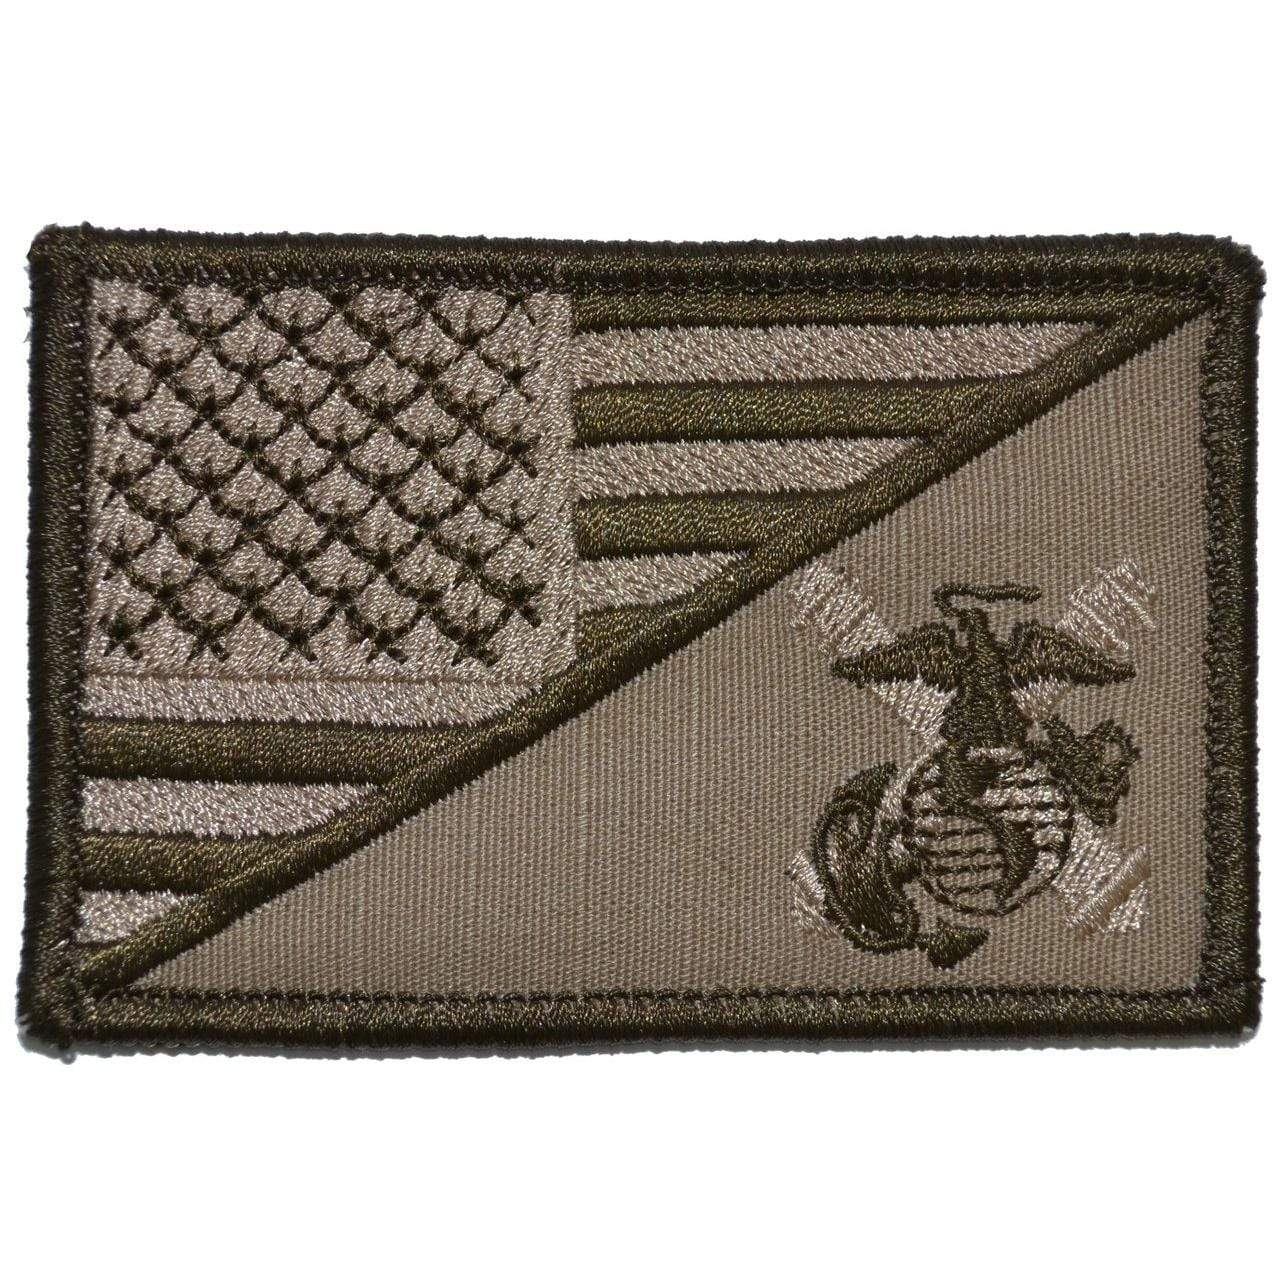 Tactical Gear Junkie Patches Coyote Brown USMC Artillery USA Flag - 2.25x3.5 Patch